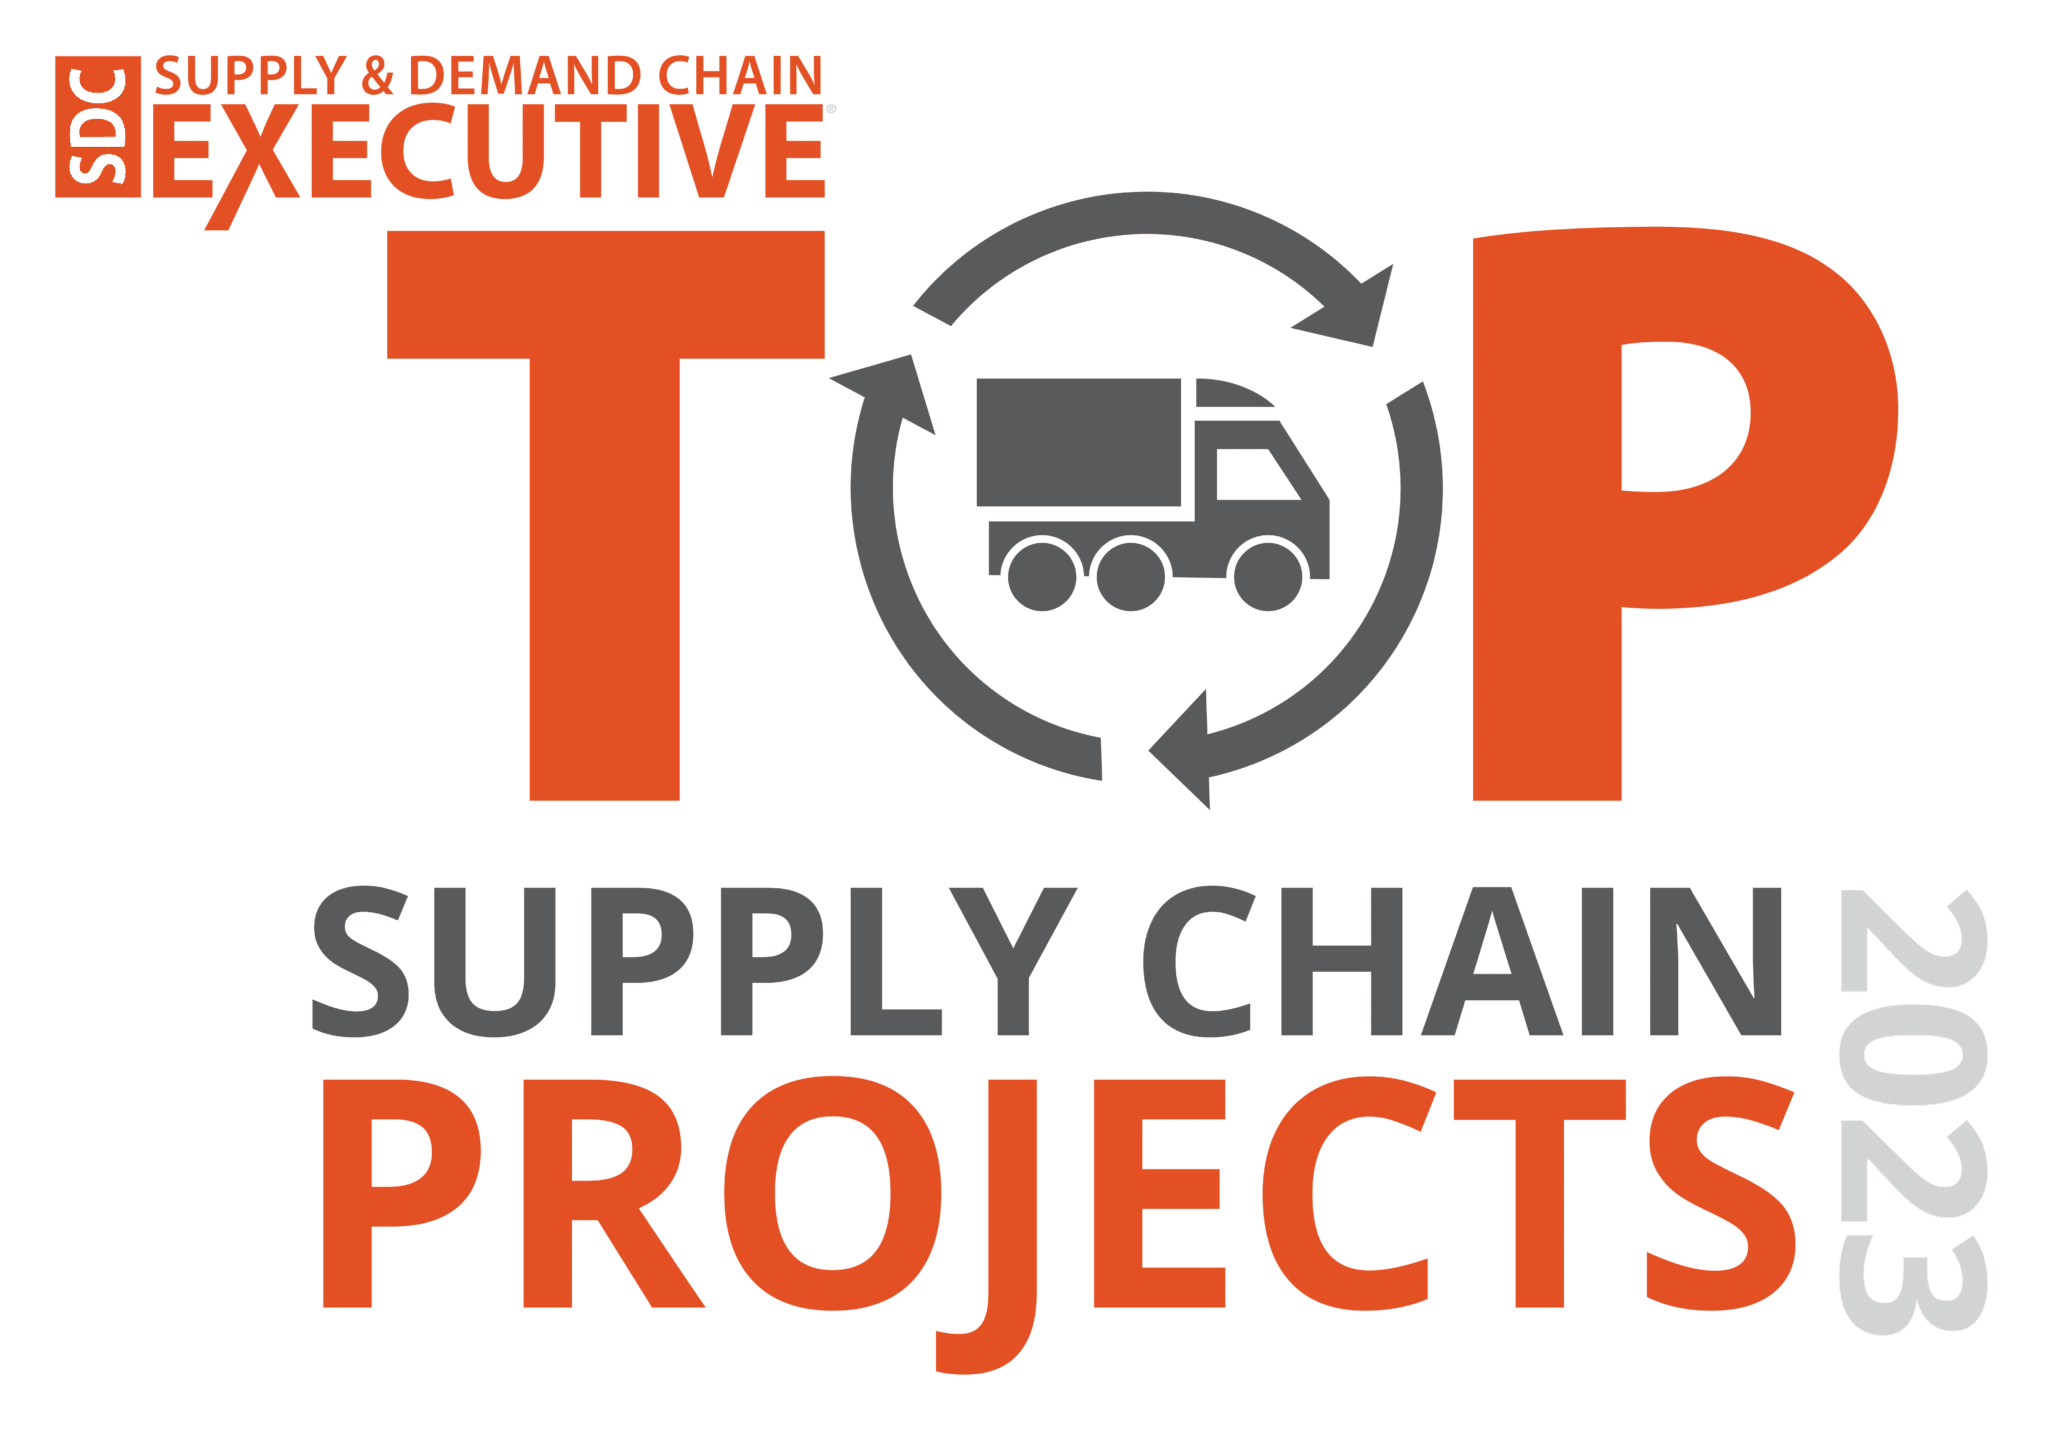 Supply & Demand Chain Executive Top Supply Chain Projects Logo